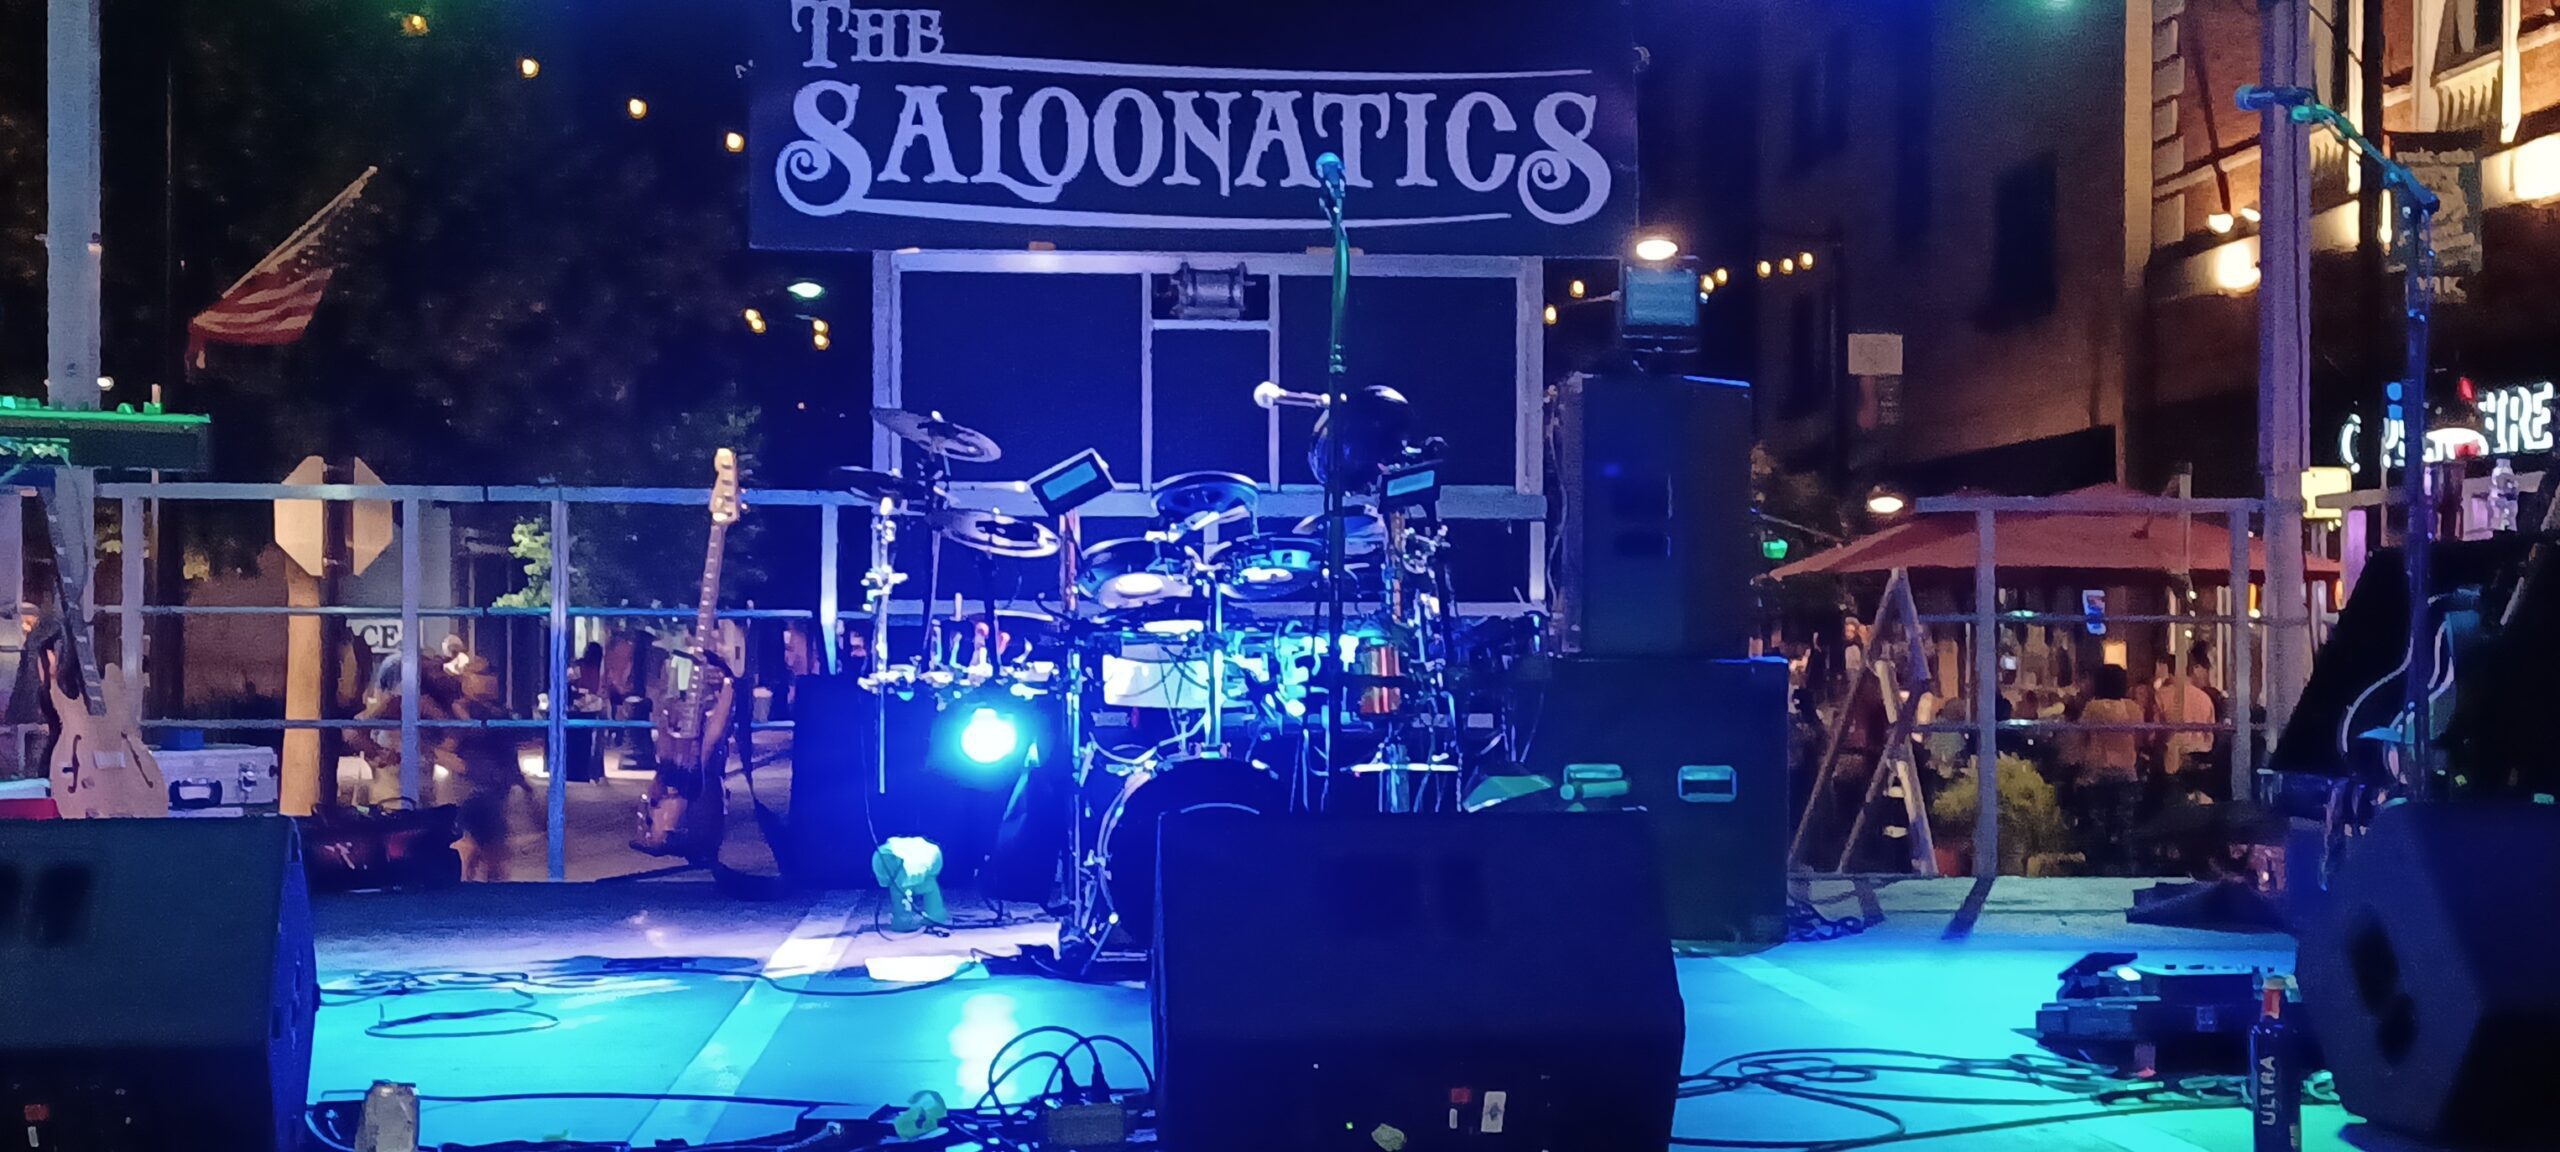 A nighttime outdoor stage setup with drums and "THE SALOONATICS" sign for an upcoming performance.